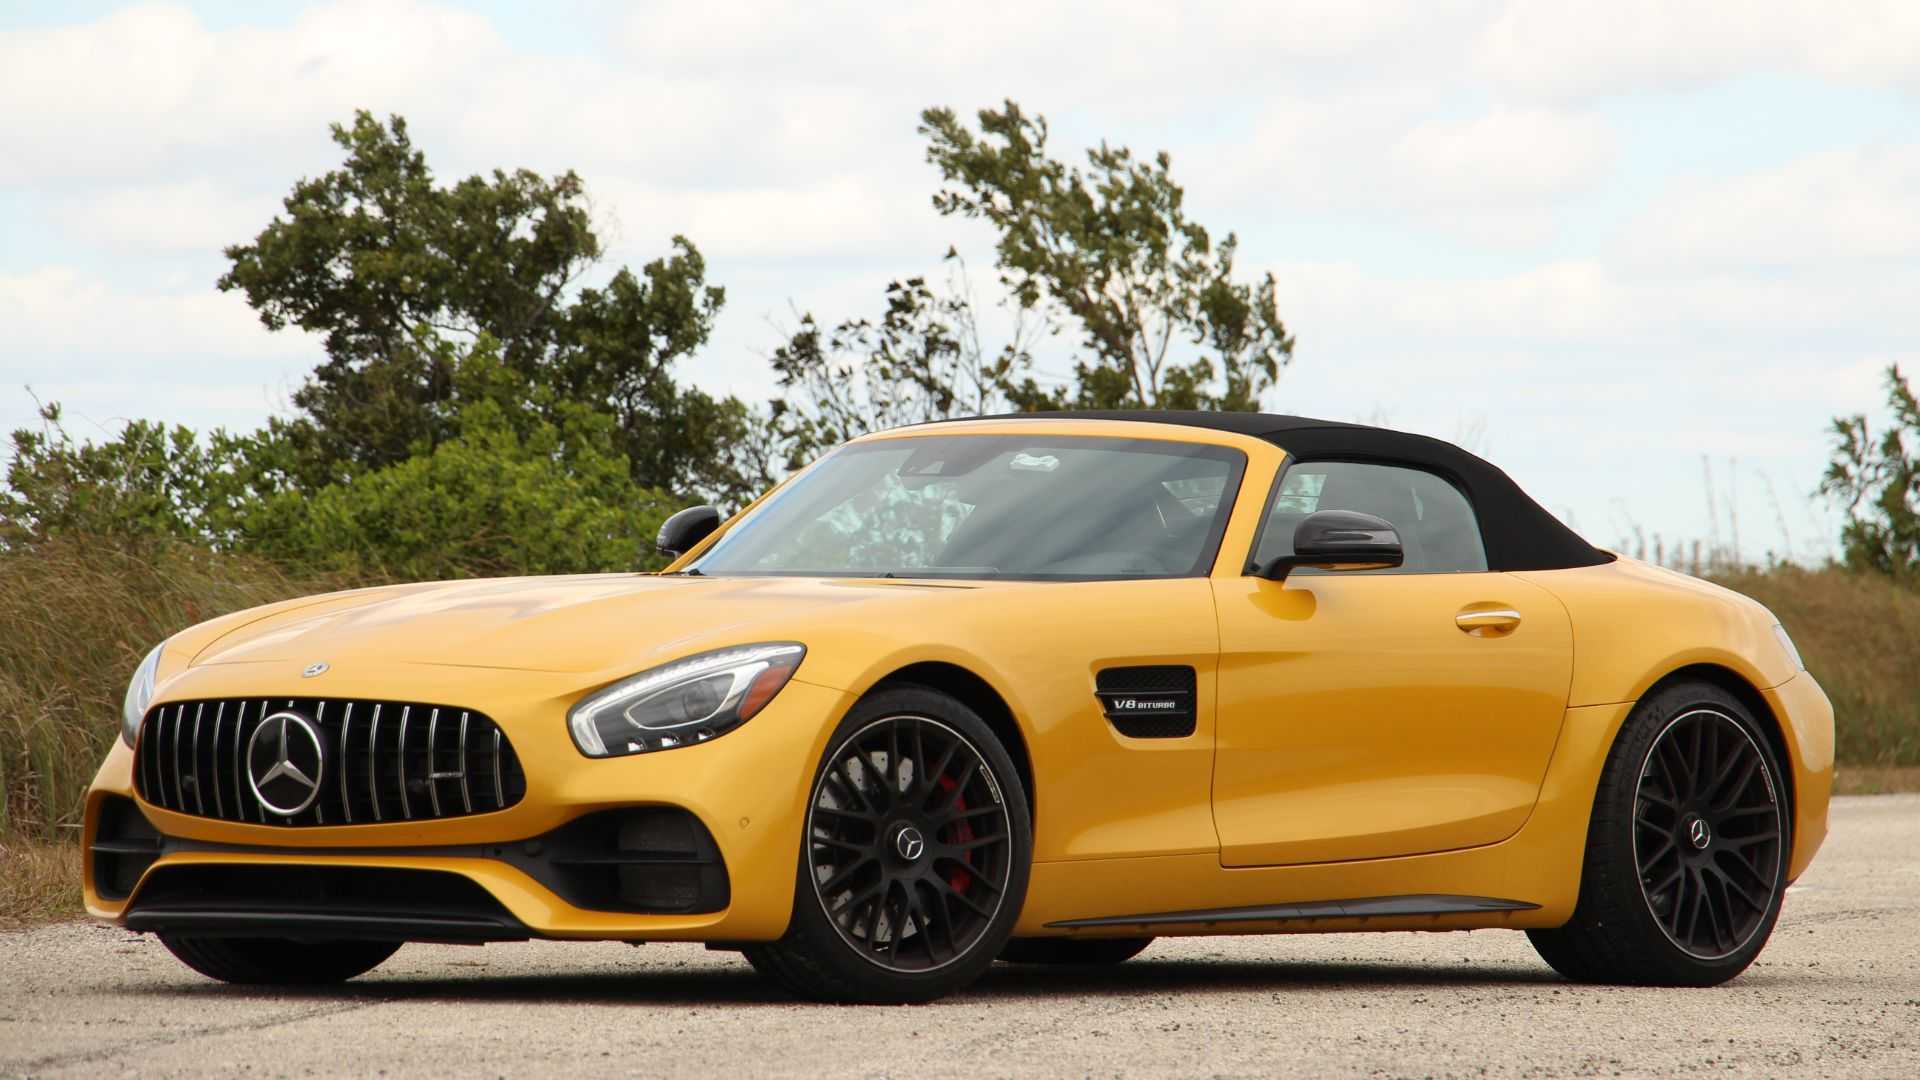 2019 Mercedes-AMG GT C Roadster Review: Fast Banana